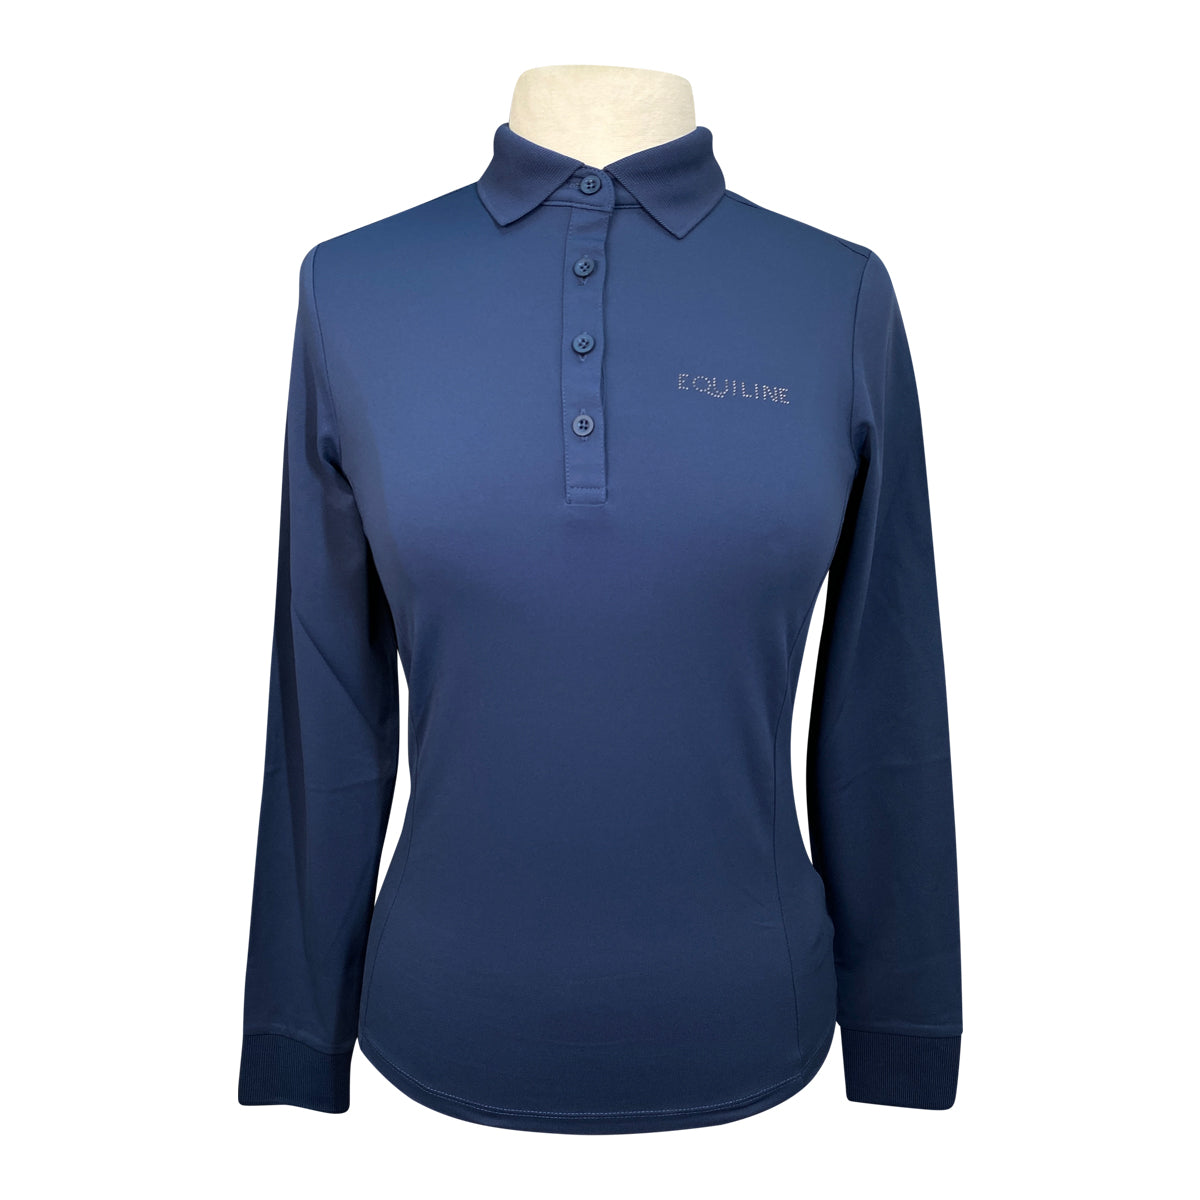 Equiline 'Evae' Short Sleeve Polo Shirt in Diplomatic Blue